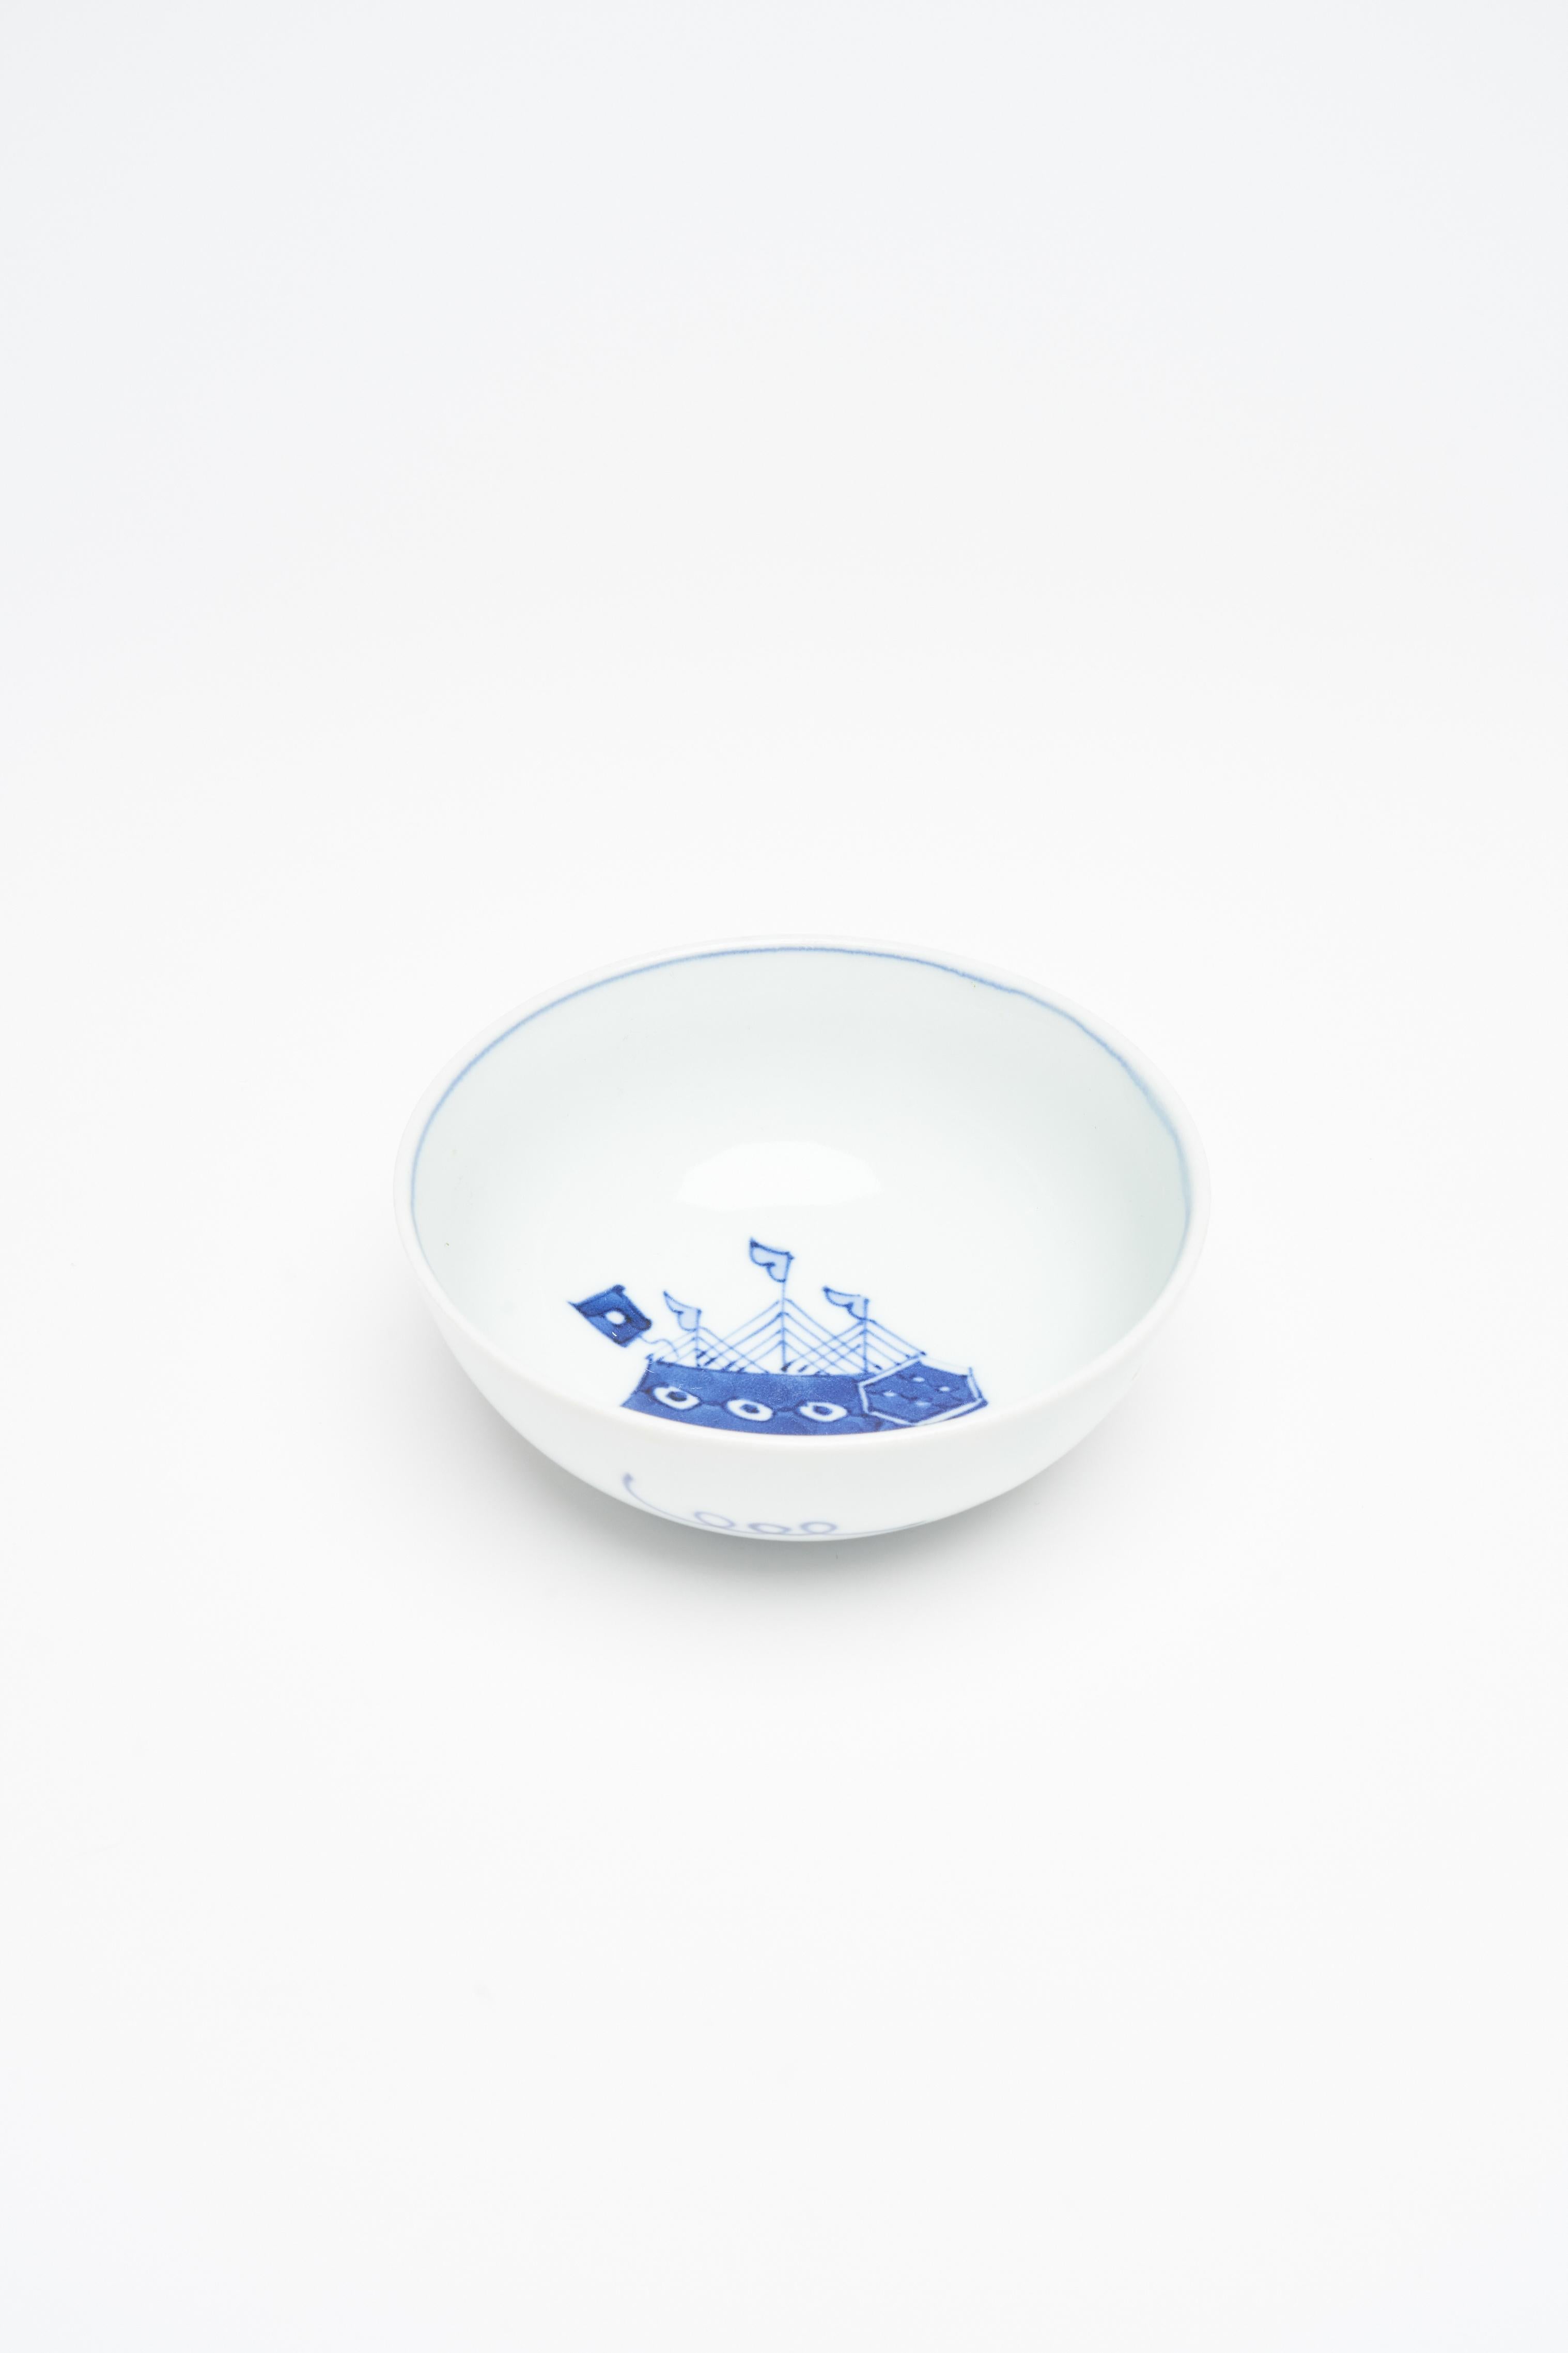 A beautiful porcelain bowl from Japan. A piece which has unique characteristics such as the mythical boat motif in the centre of the bowl.

It has a special feeling - somewhat minimalist - somewhat spiritual. The design of the ship feels very